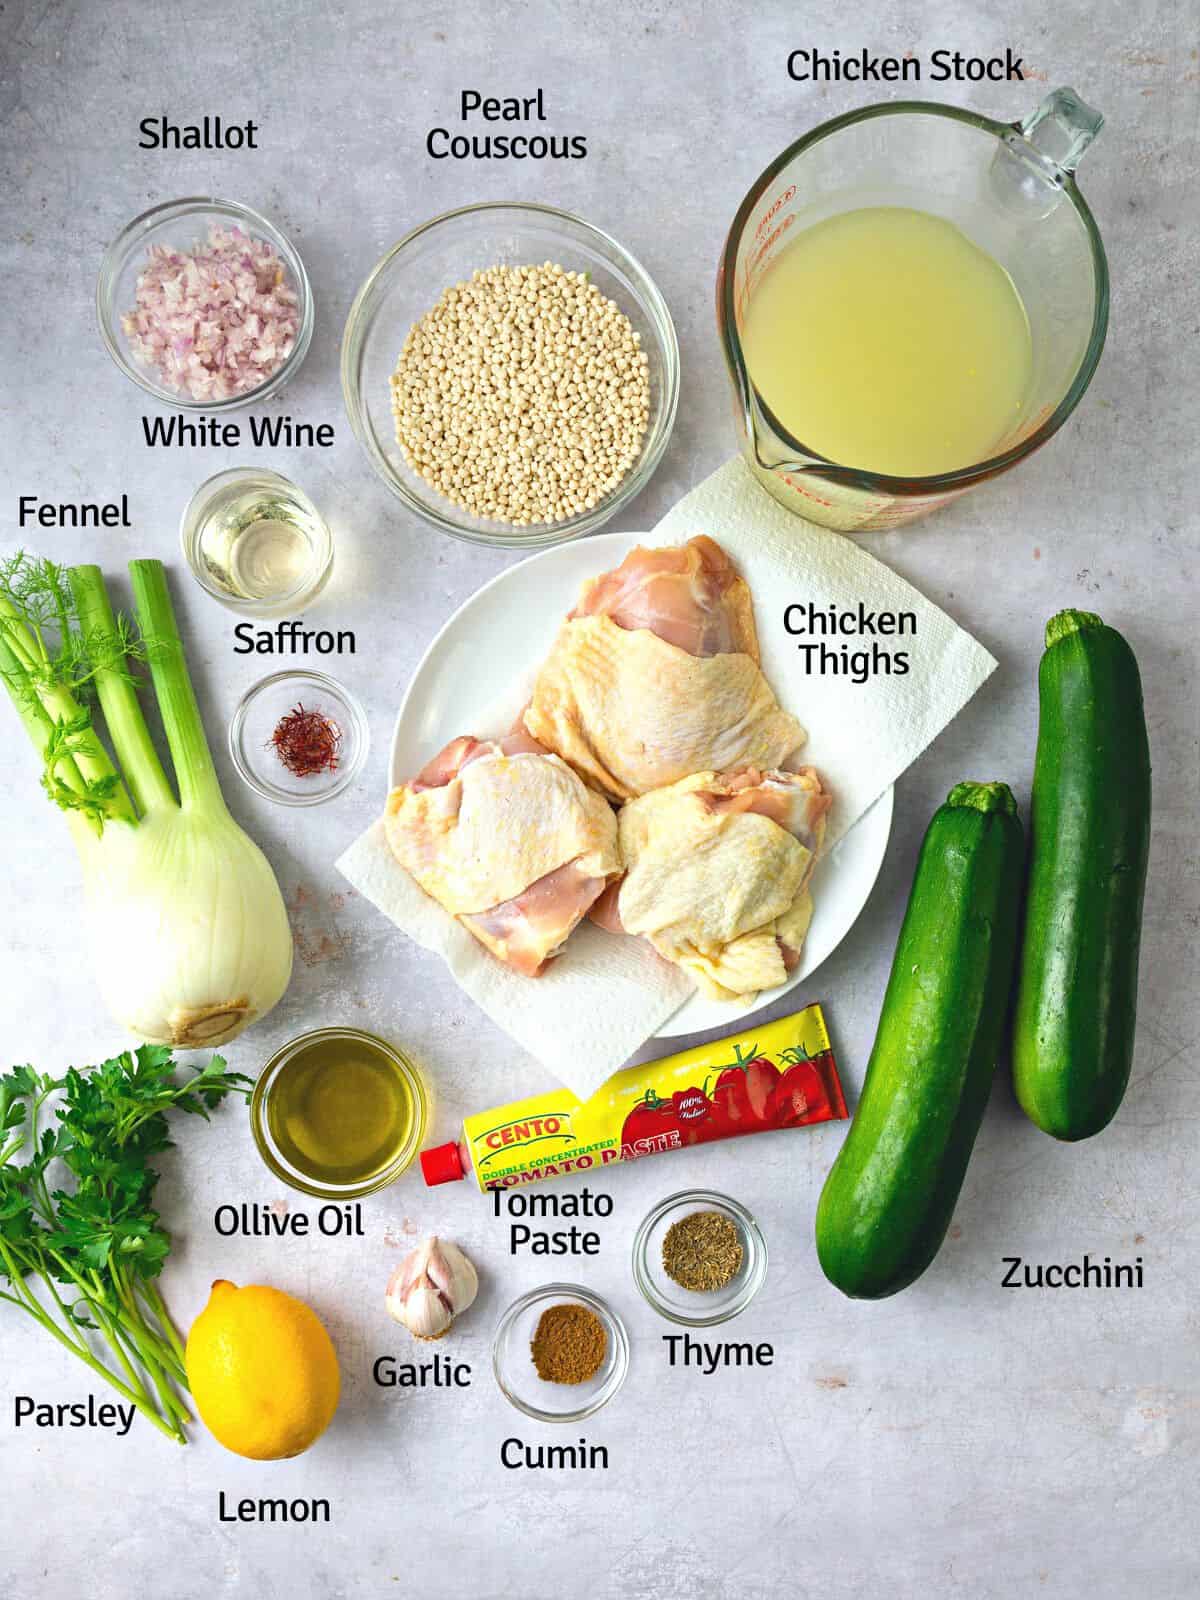 Ingredients for one pot Israeli couscous with chicken, including tomato paste, spices, fennel and white wine.